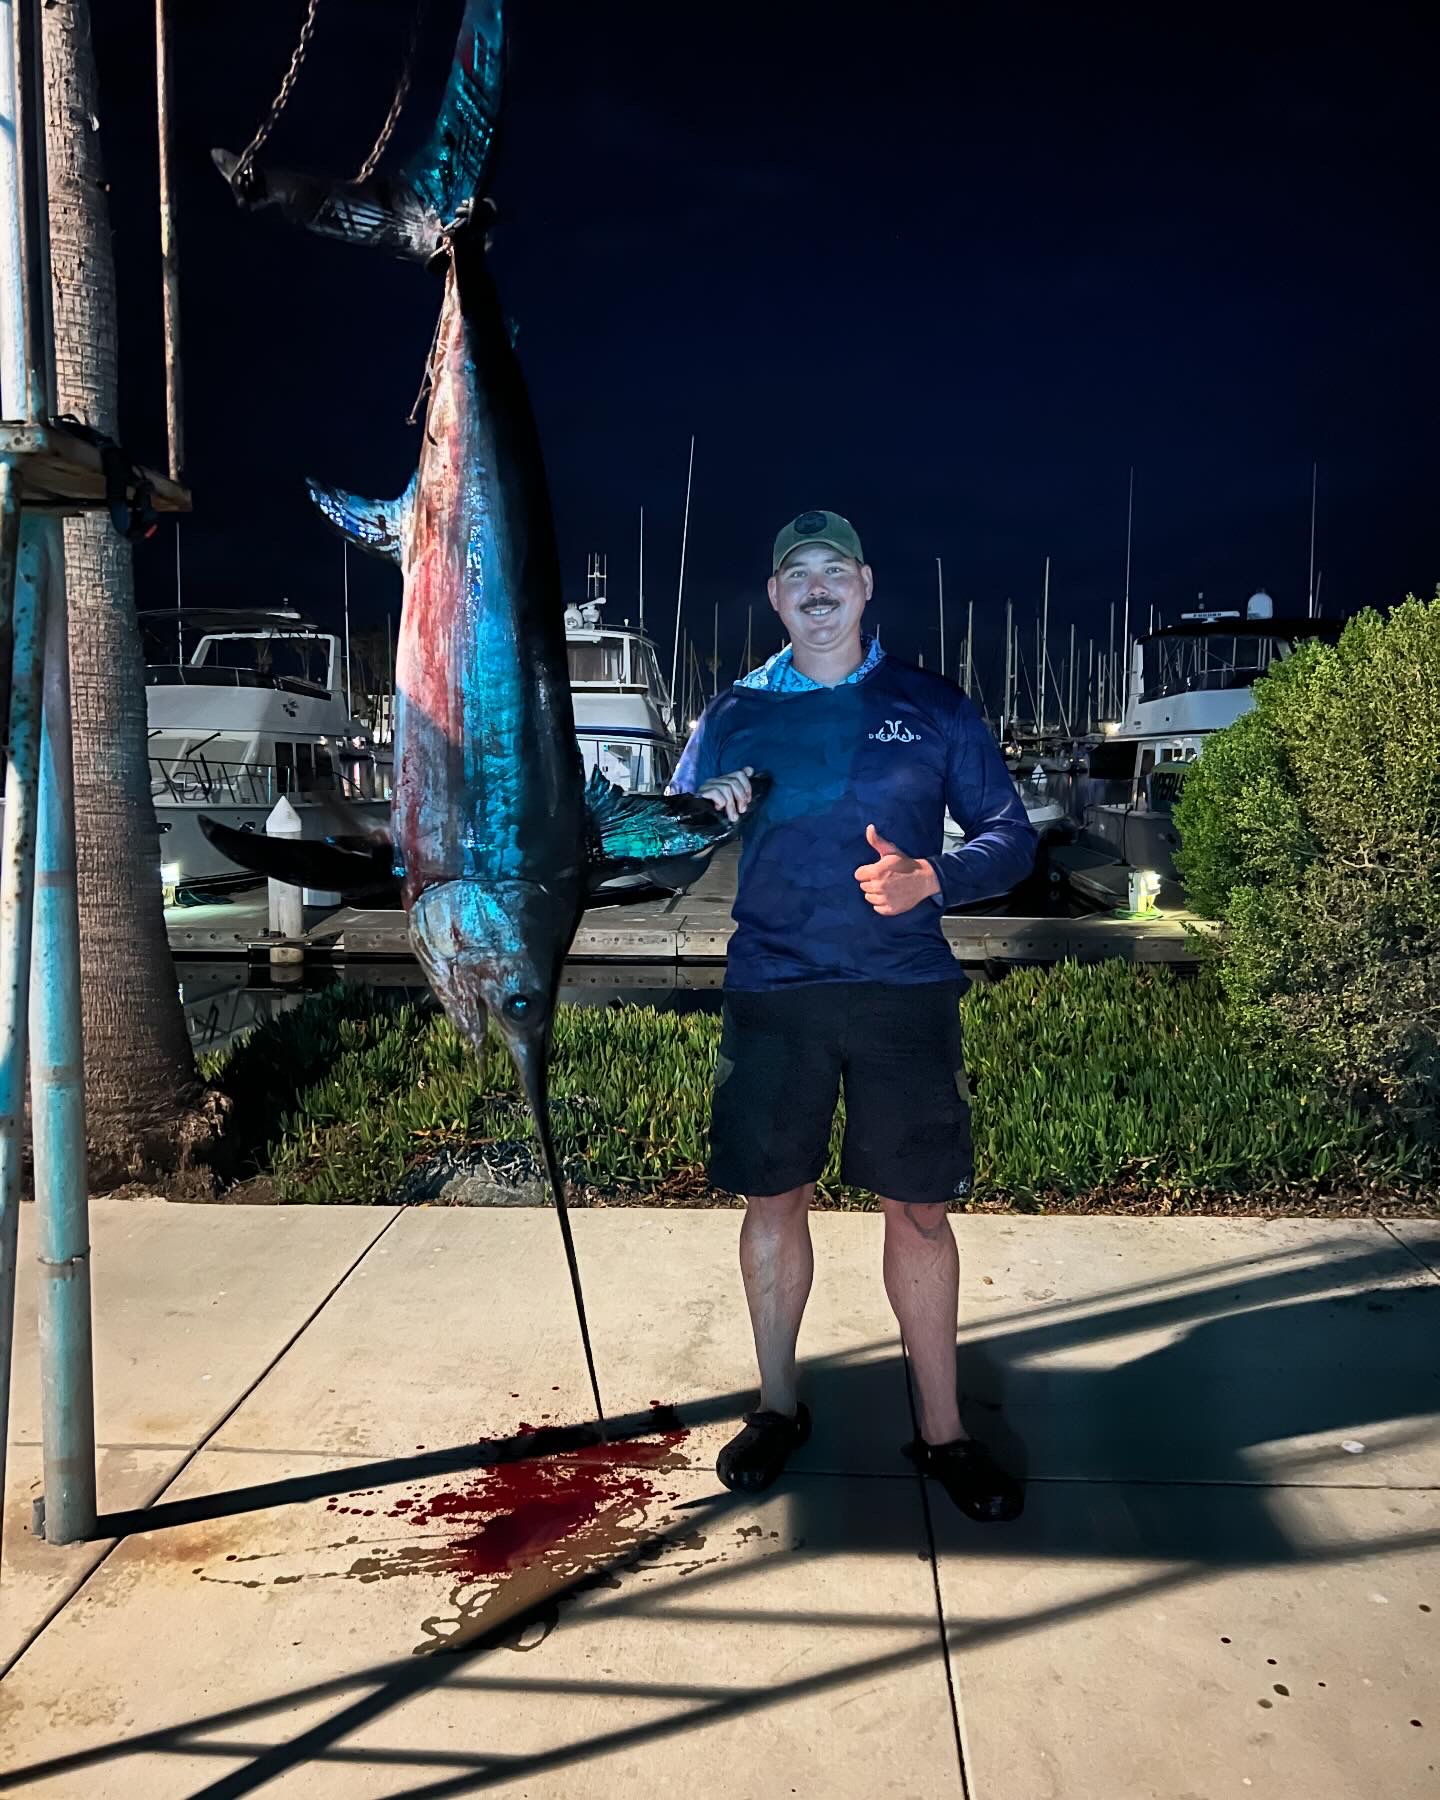 Angler nabs swordfish from an inflatable…for the second time